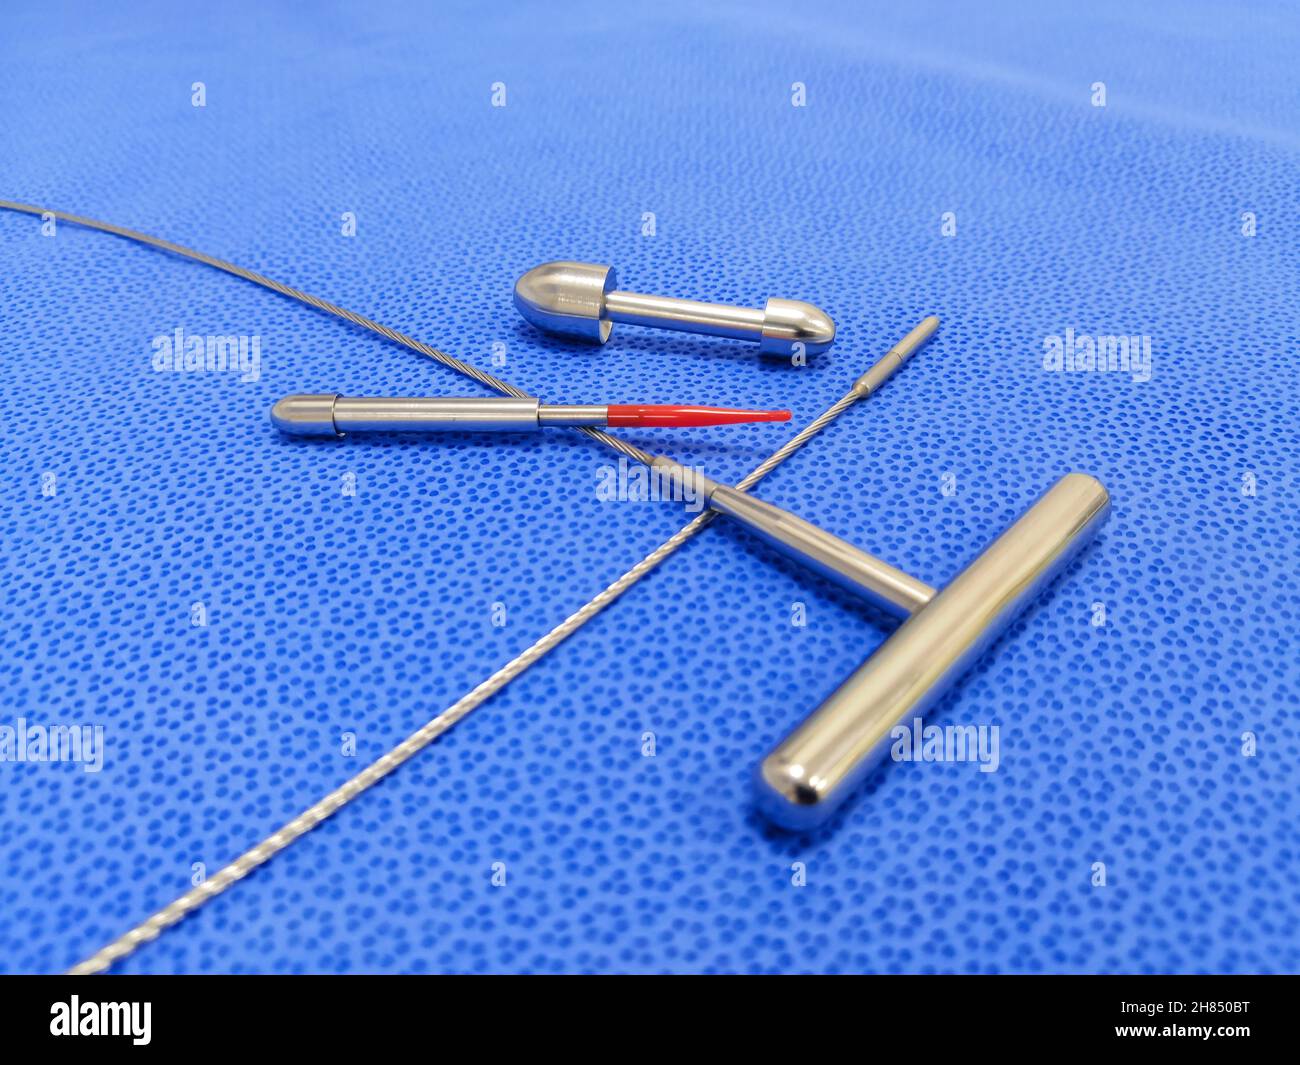 Closeup Image Of Surgical Instruments Of Varicose Veins Treatment. Selective Focus Stock Photo